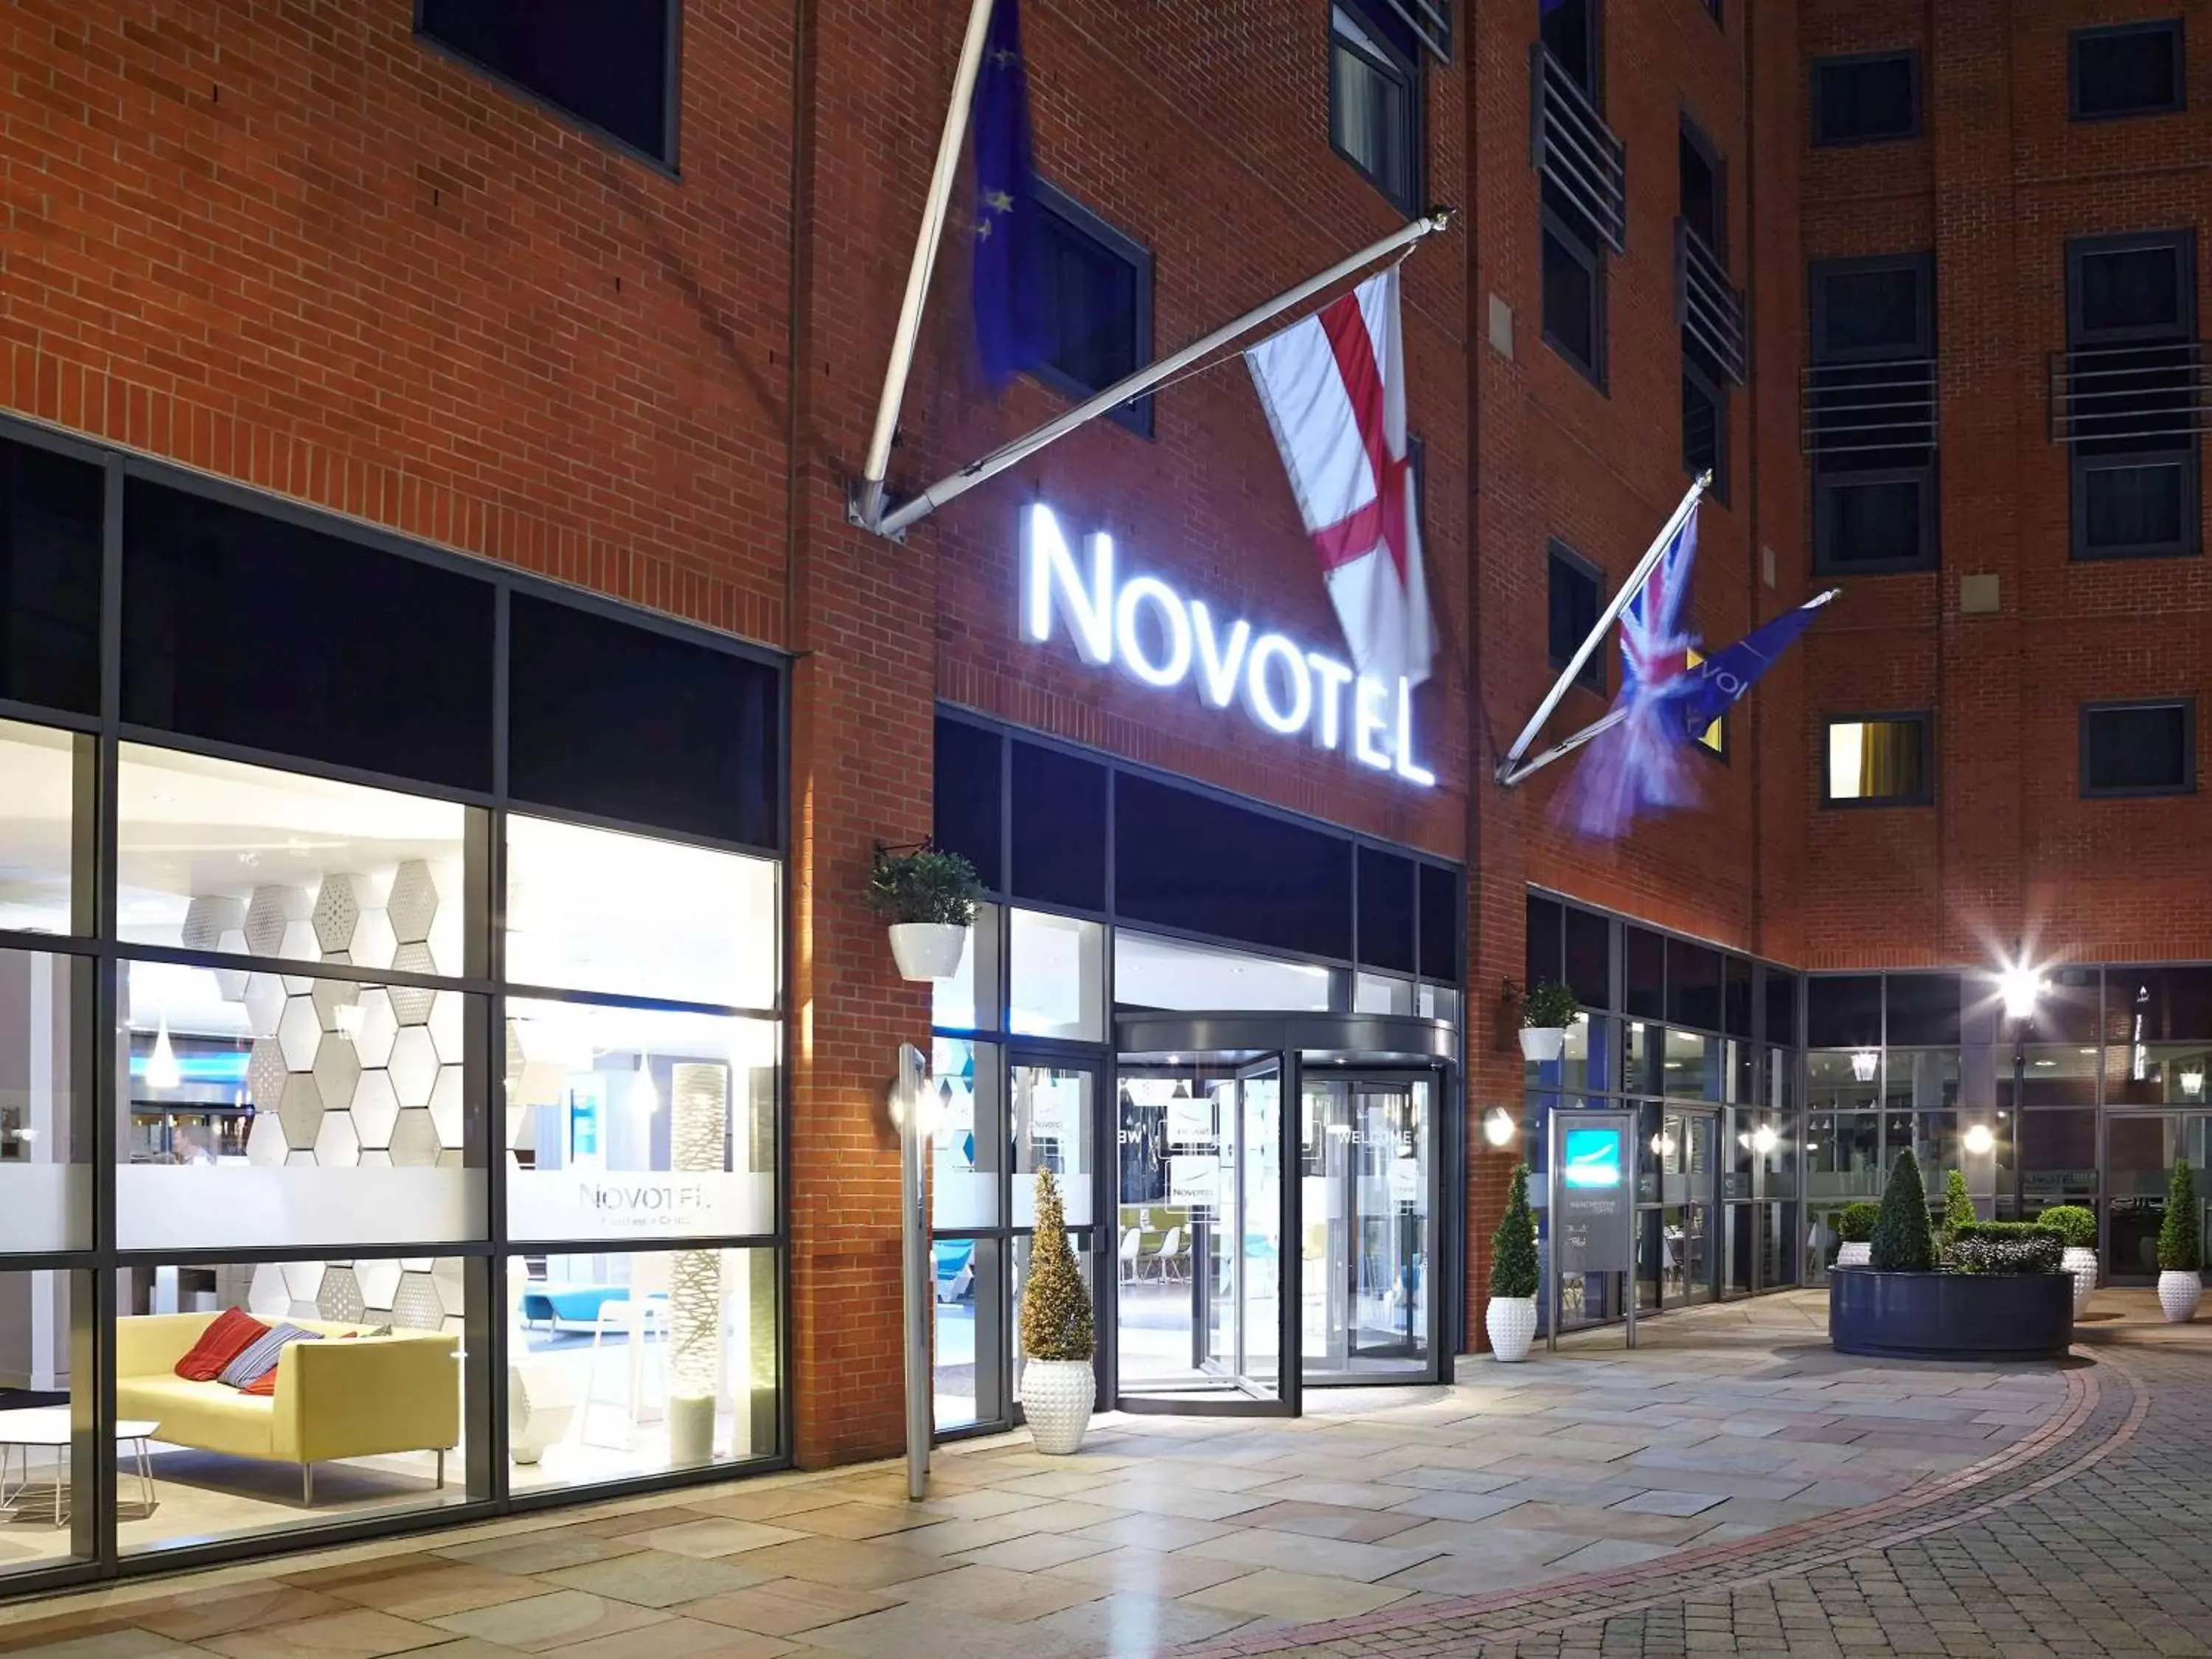 Property building in Novotel Manchester Centre